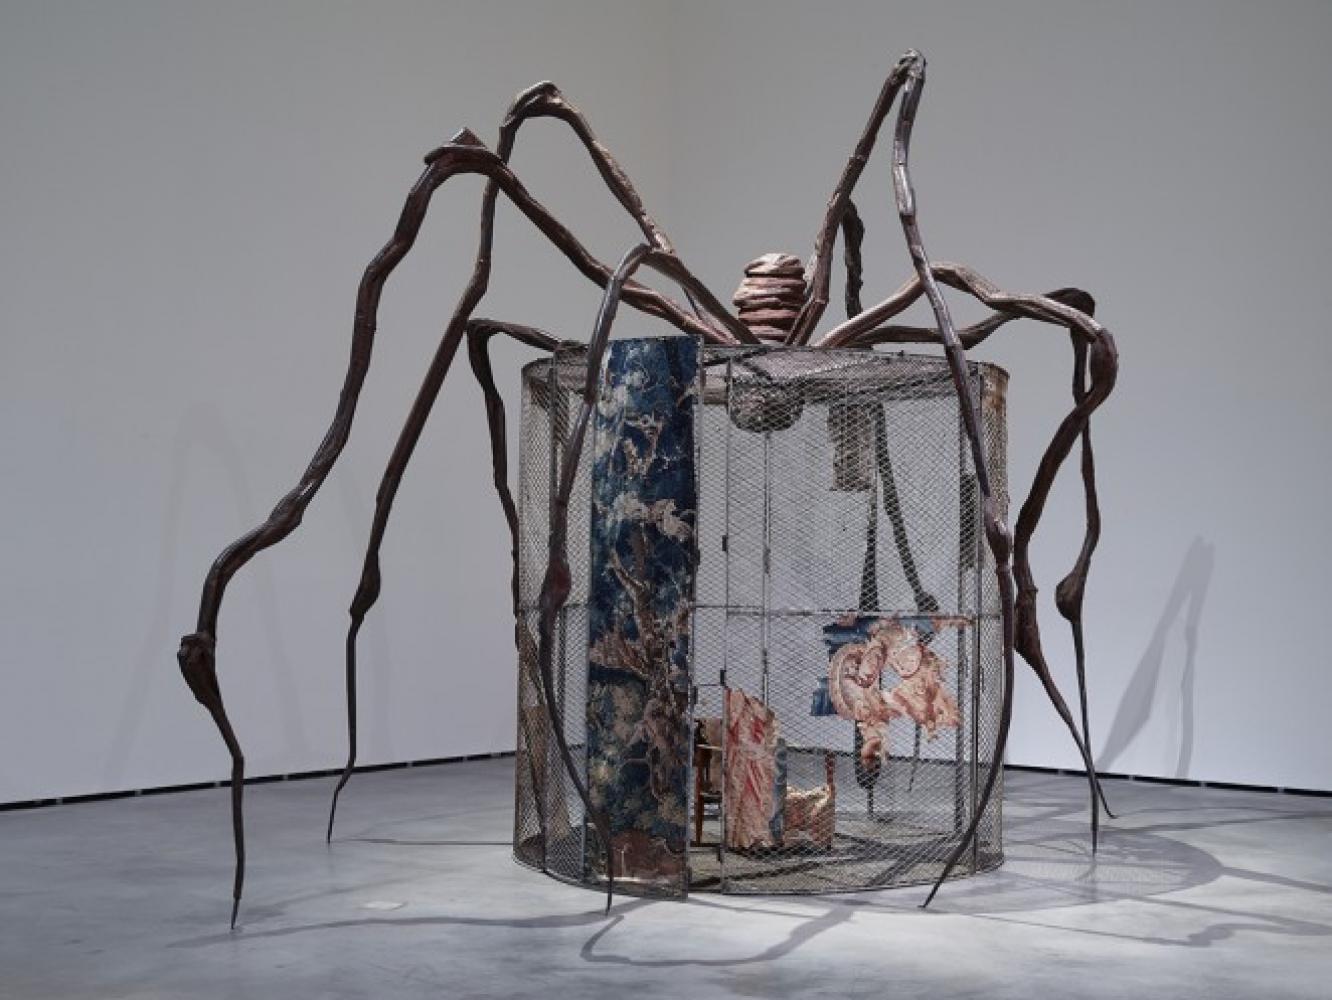 Louise Bourgeois "Spider", 1997